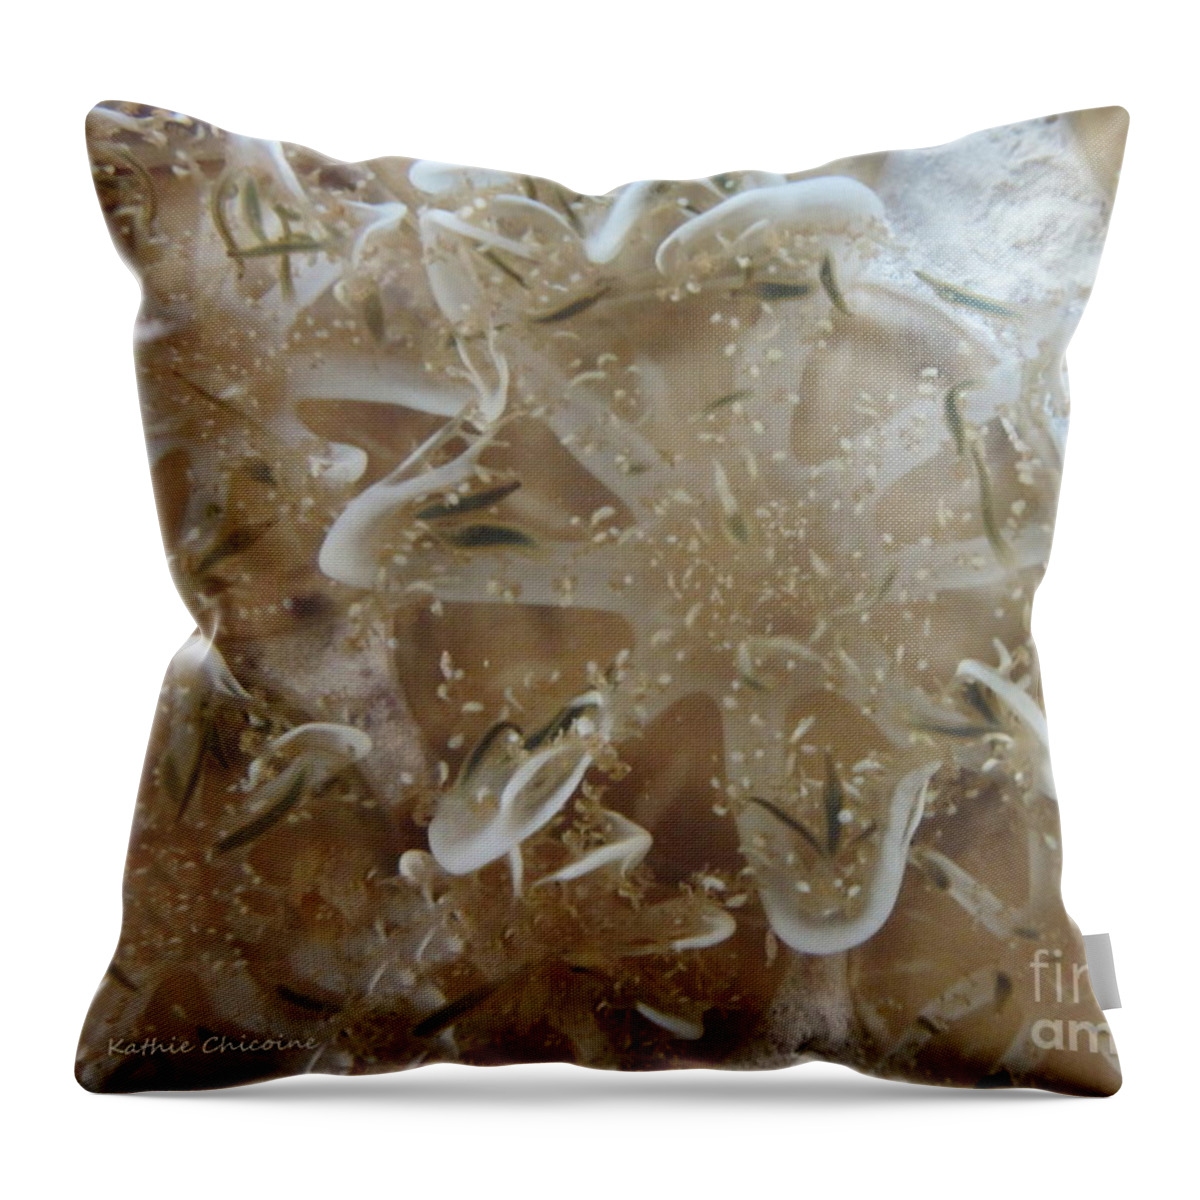 Photography Throw Pillow featuring the photograph Upside Down Jellyfish by Kathie Chicoine